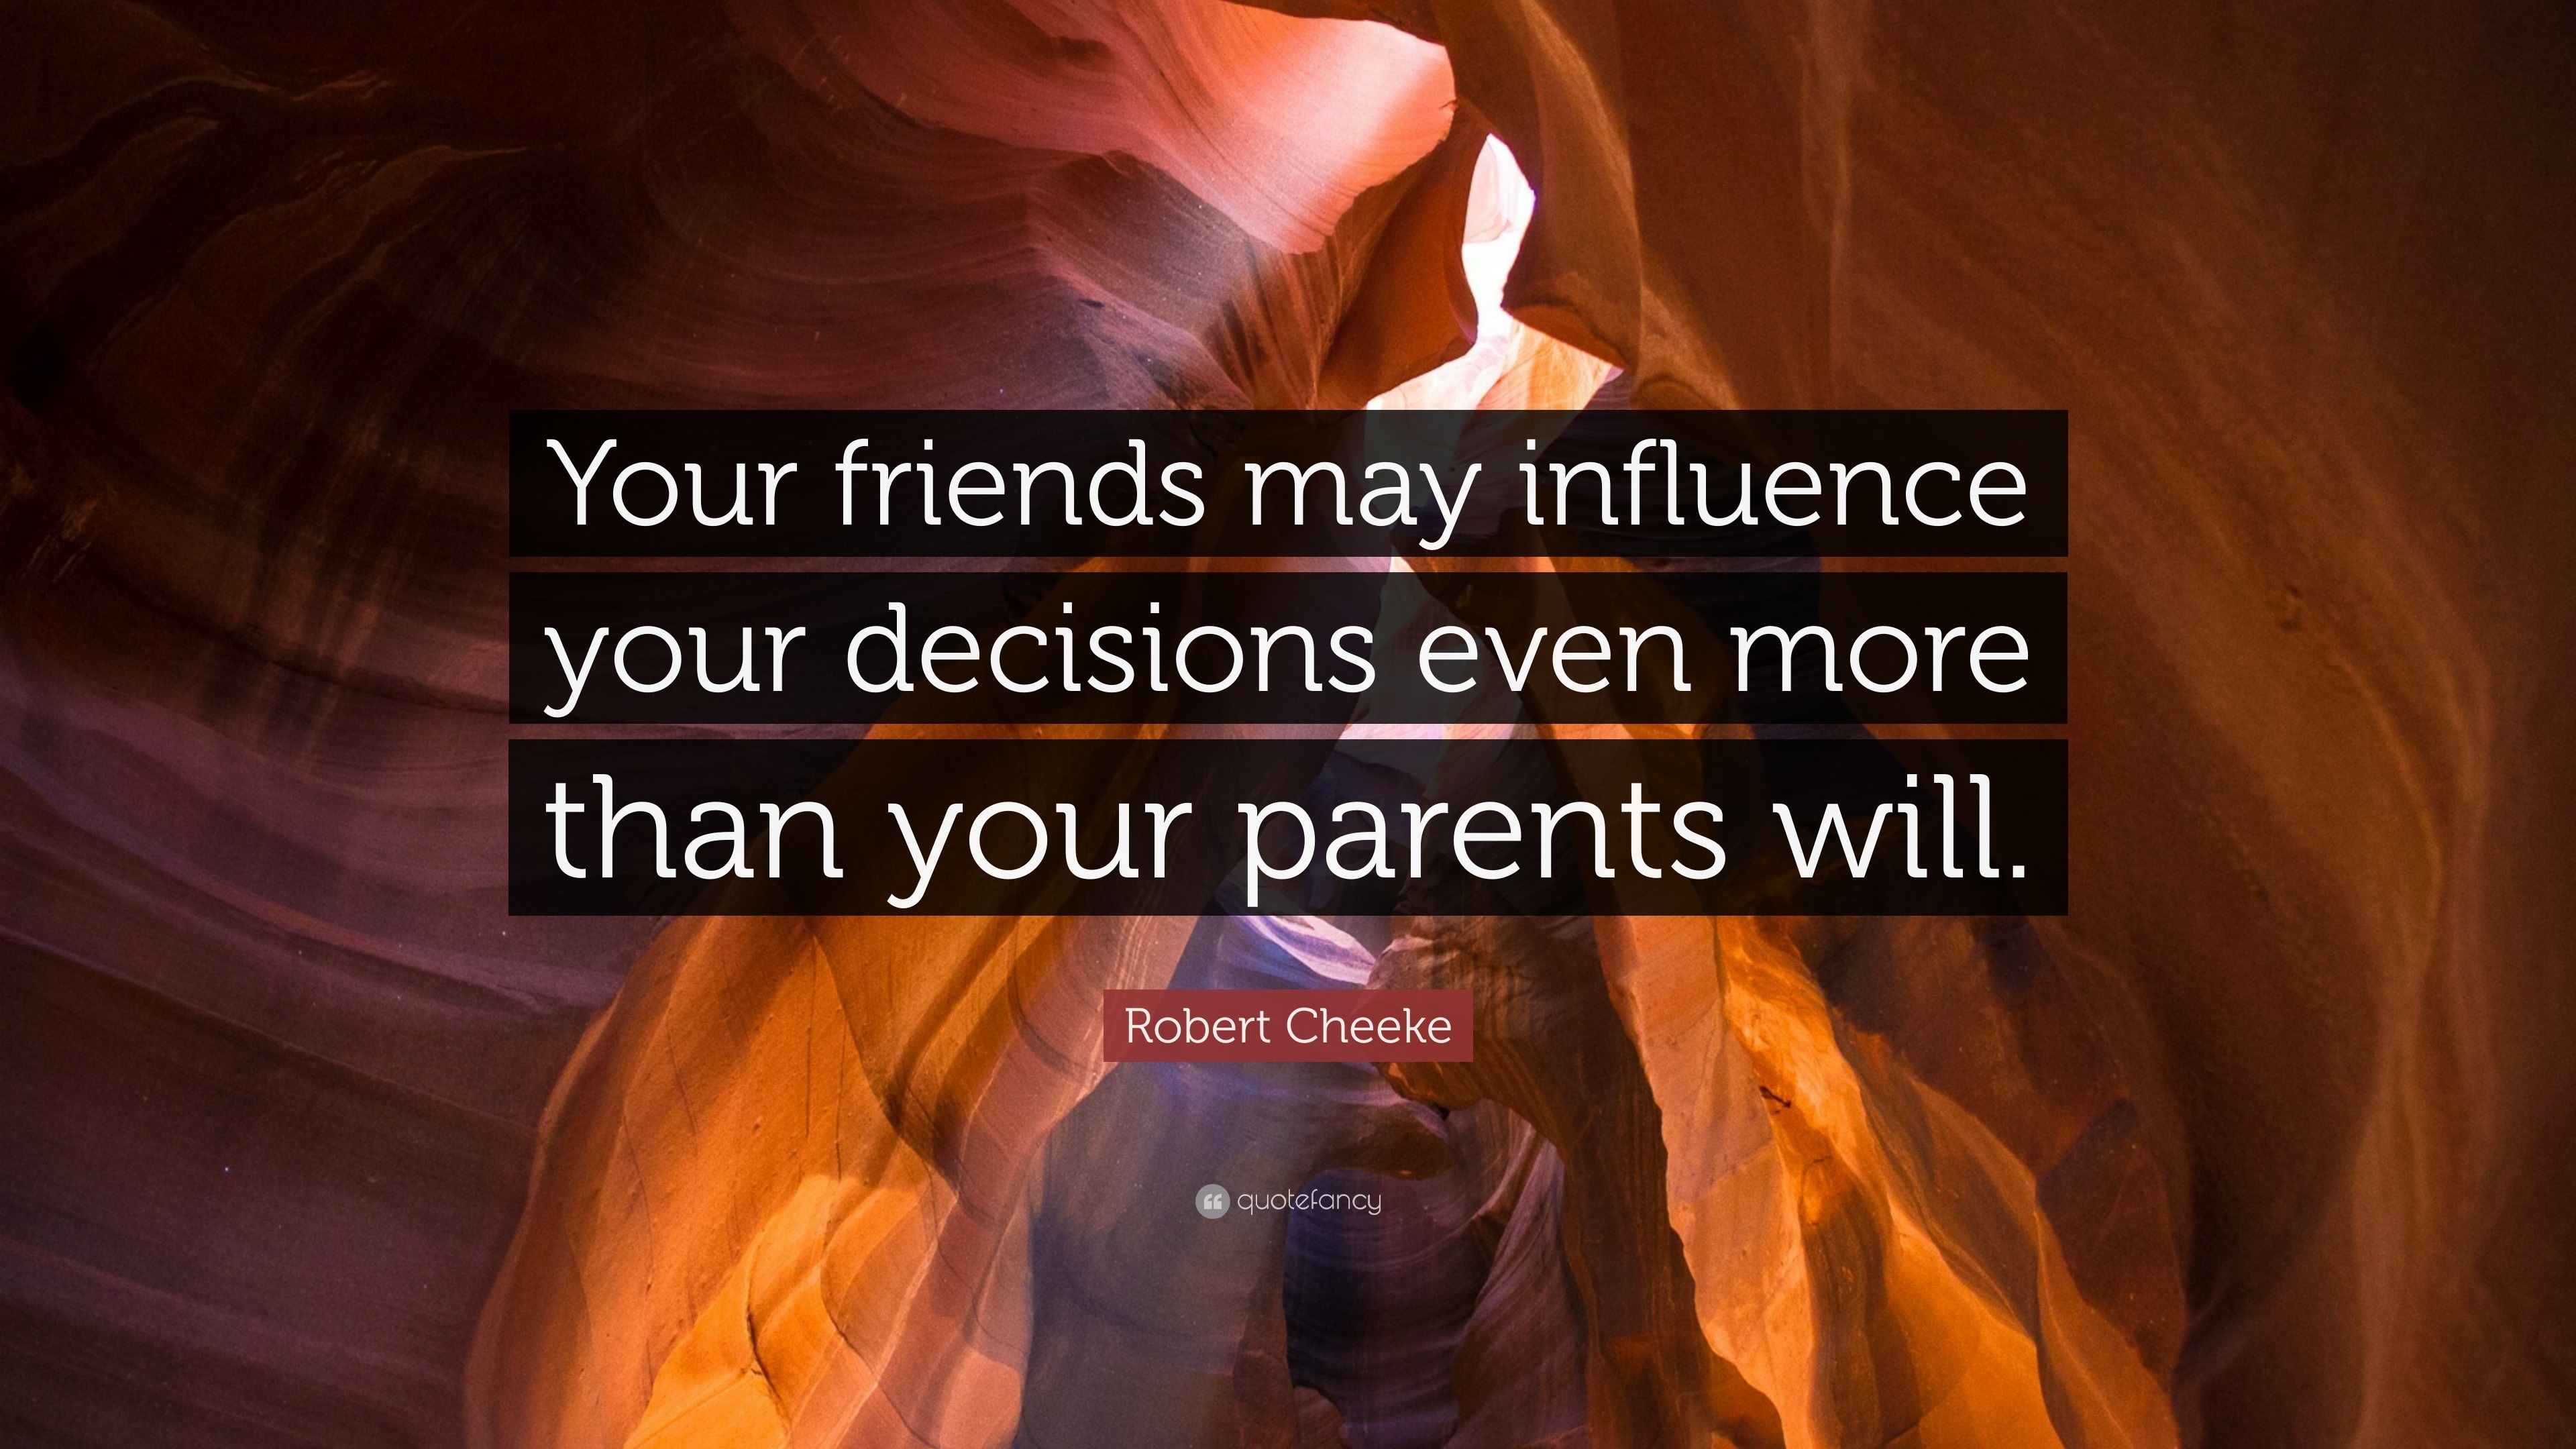 Robert Cheeke Quote “your Friends May Influence Your Decisions Even